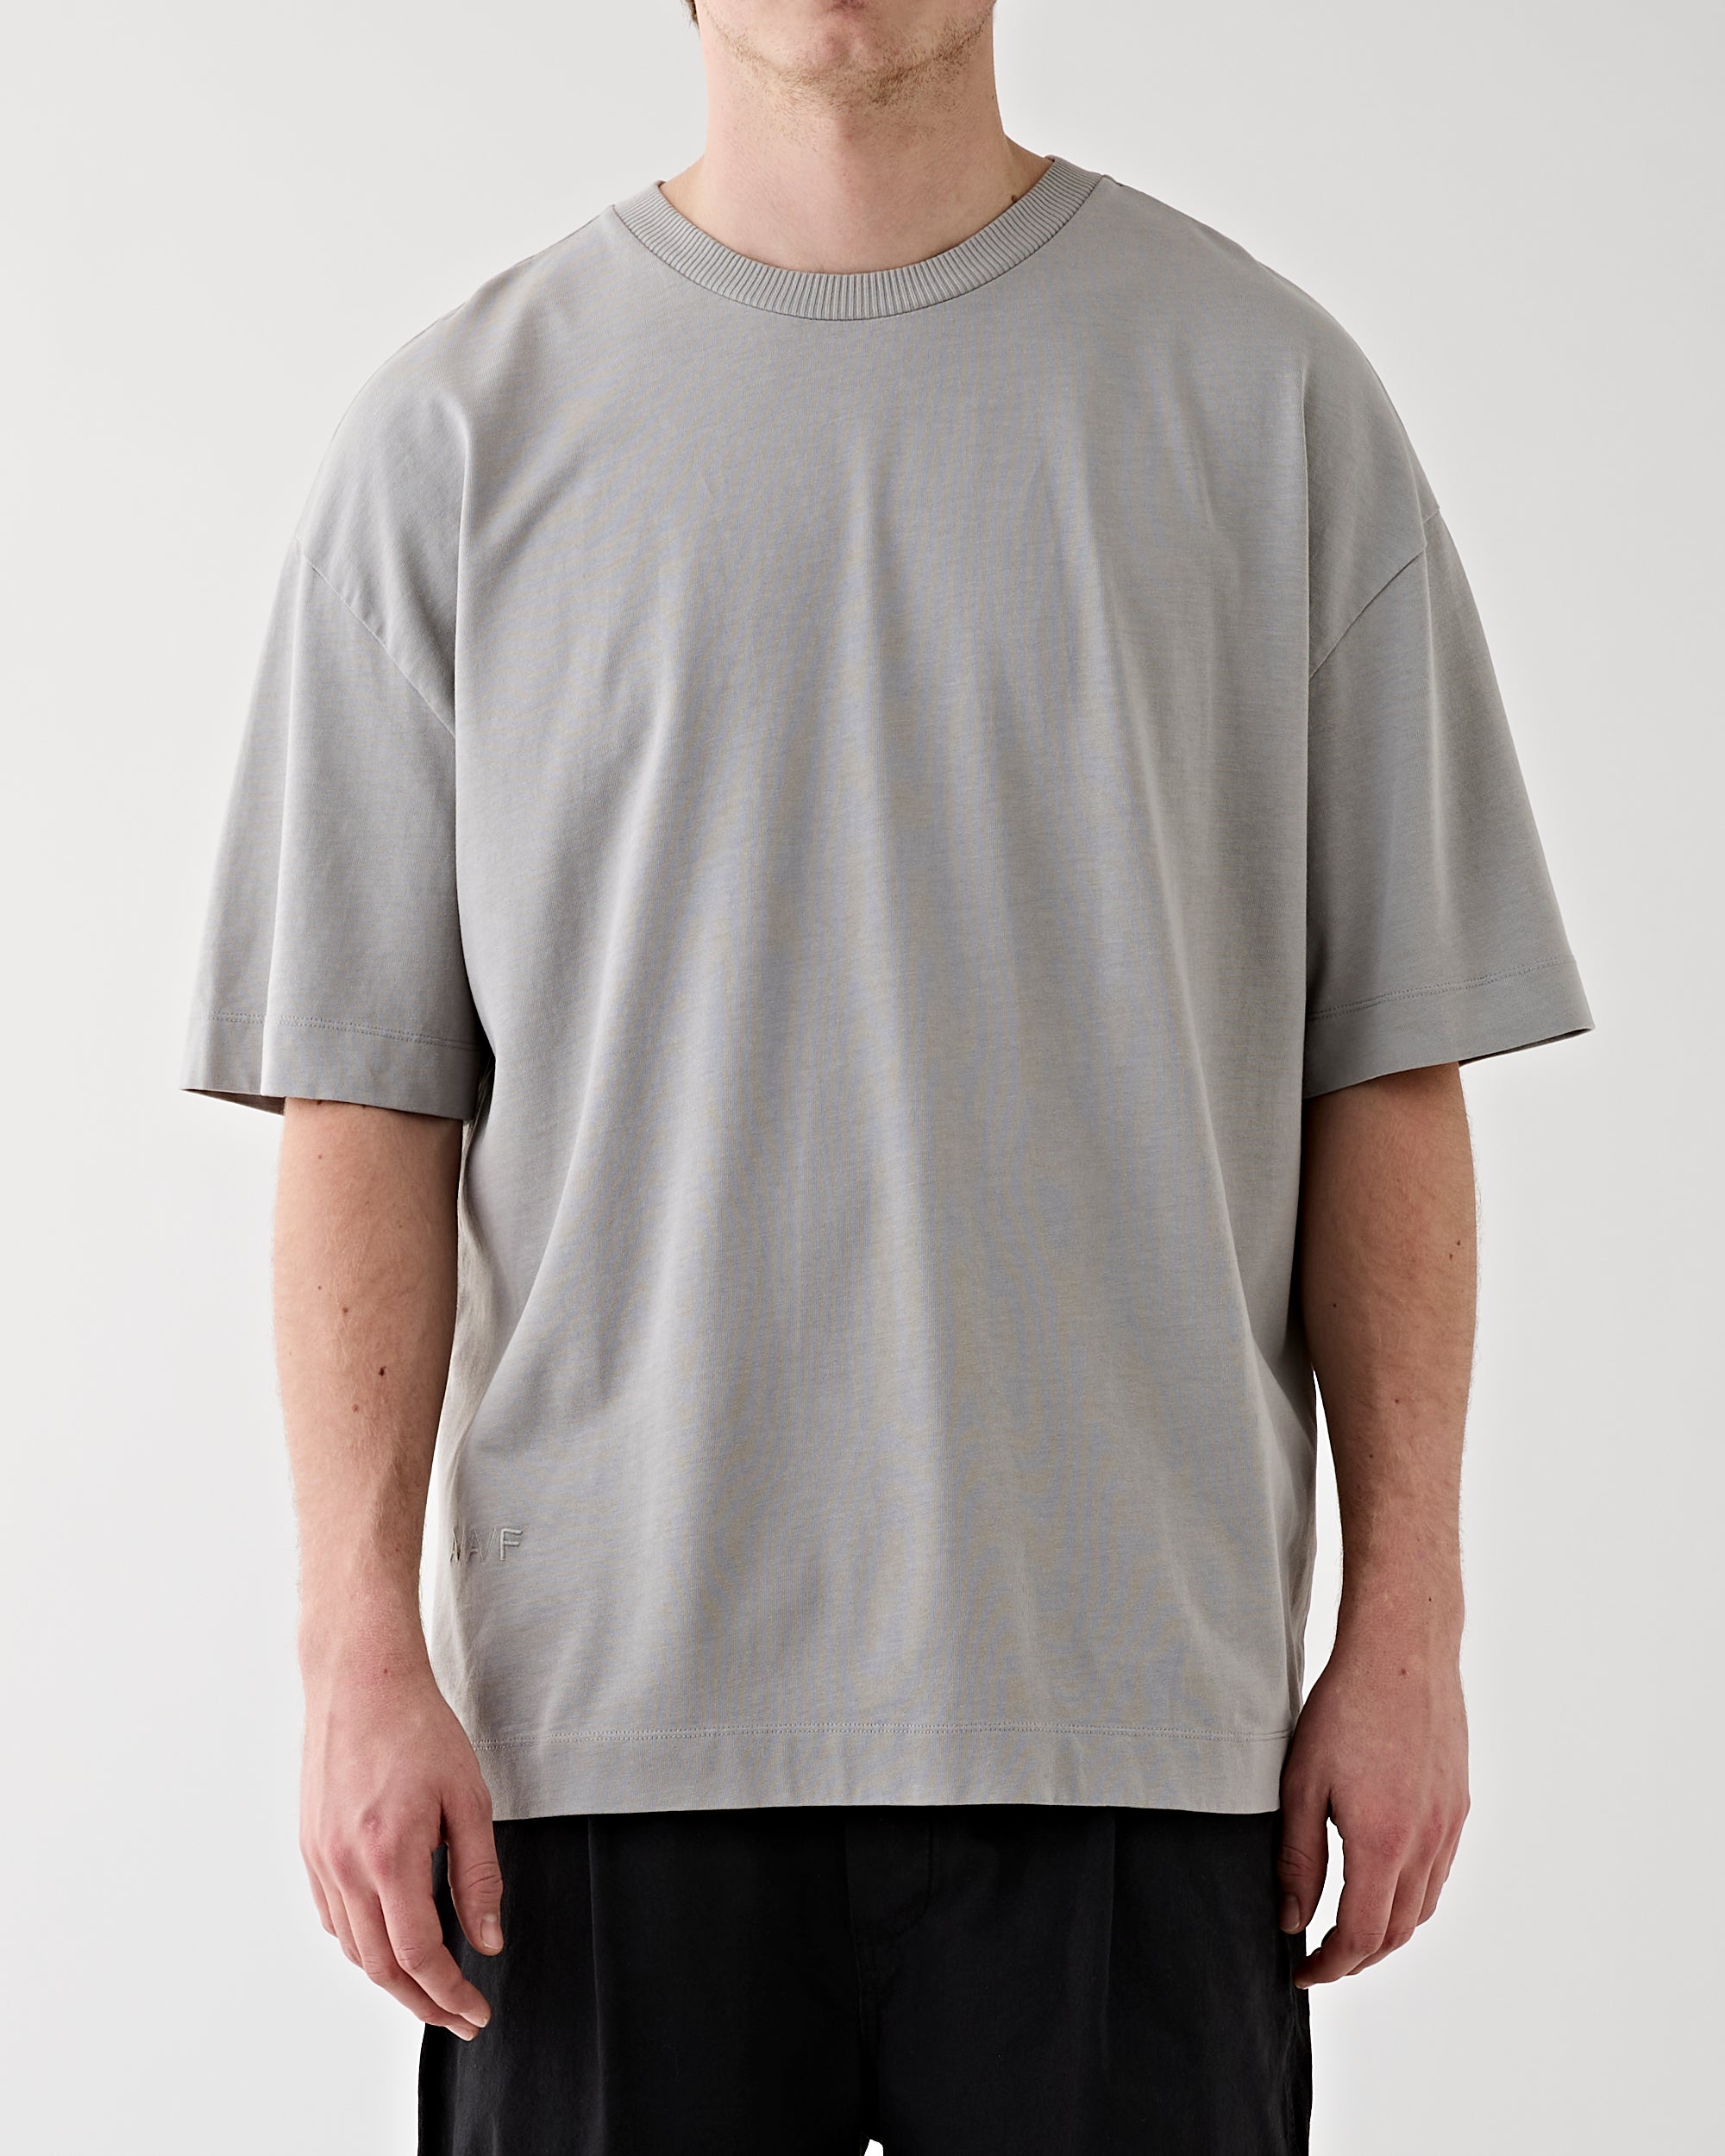 Applied Art Forms LM1-4 Oversized T- Shirt Ghost Grey T-shirt S/S Men